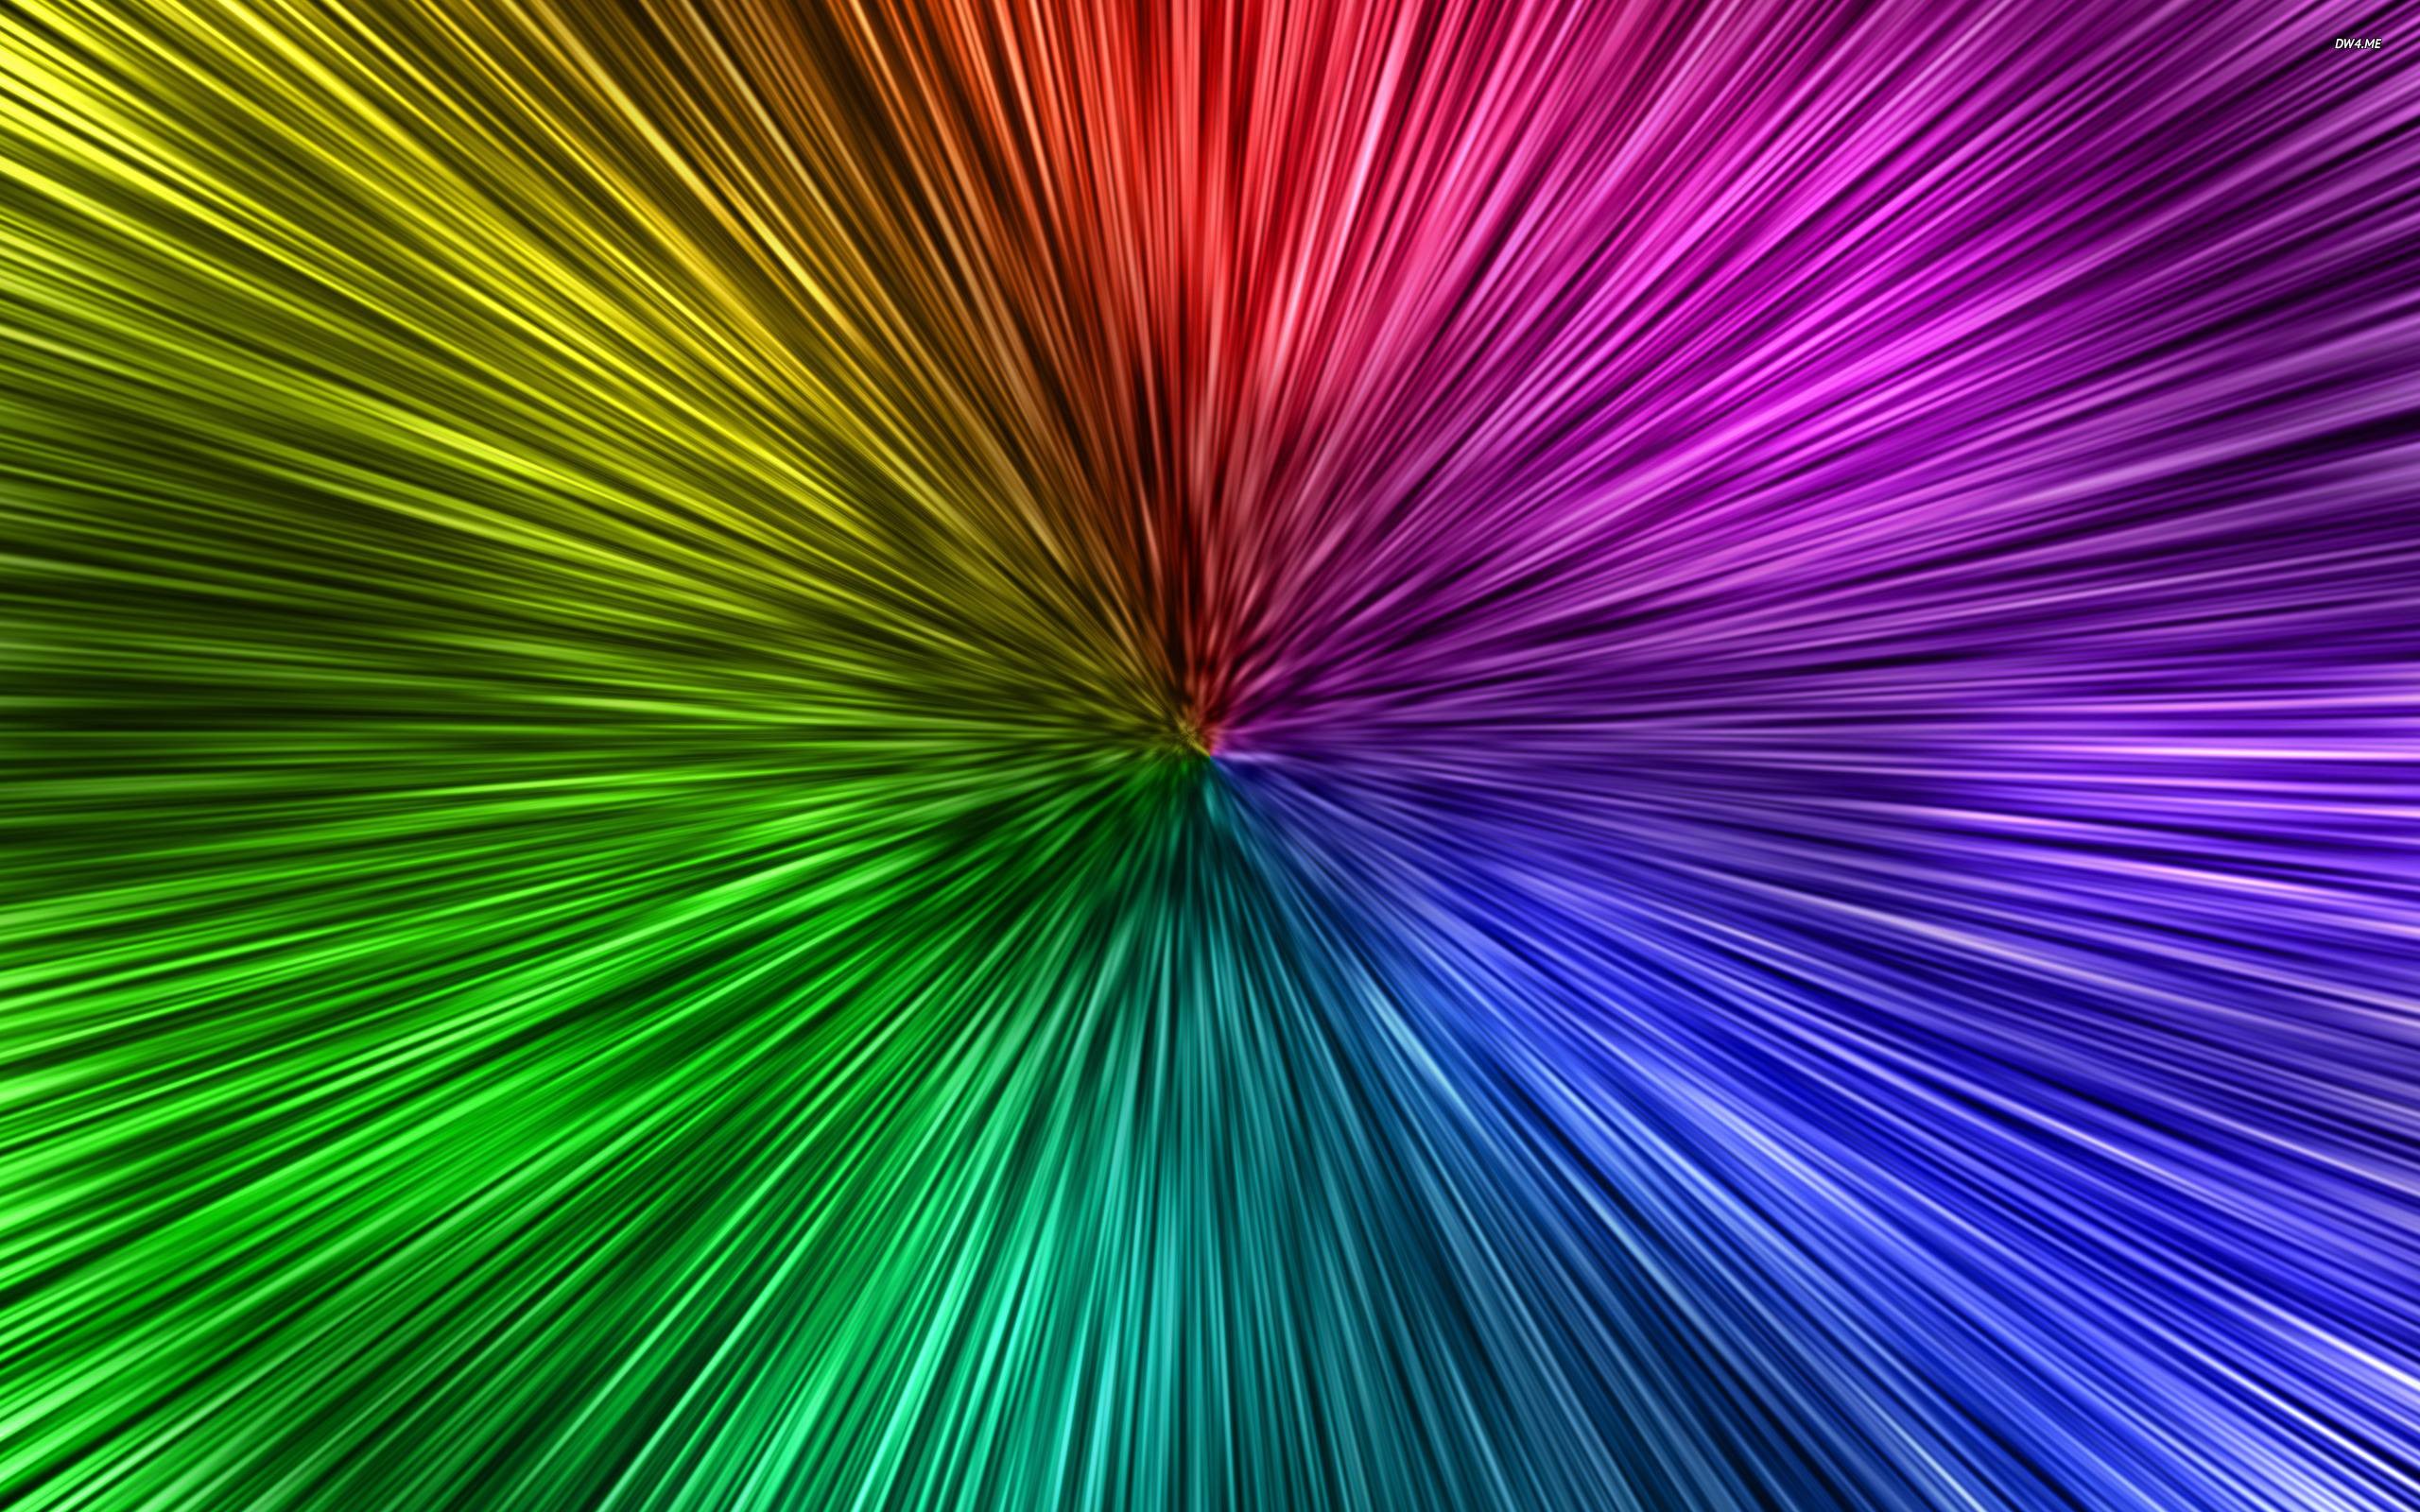 2560x1600 Neon Colorful Computer Backgrounds Images & Pictures - Becuo